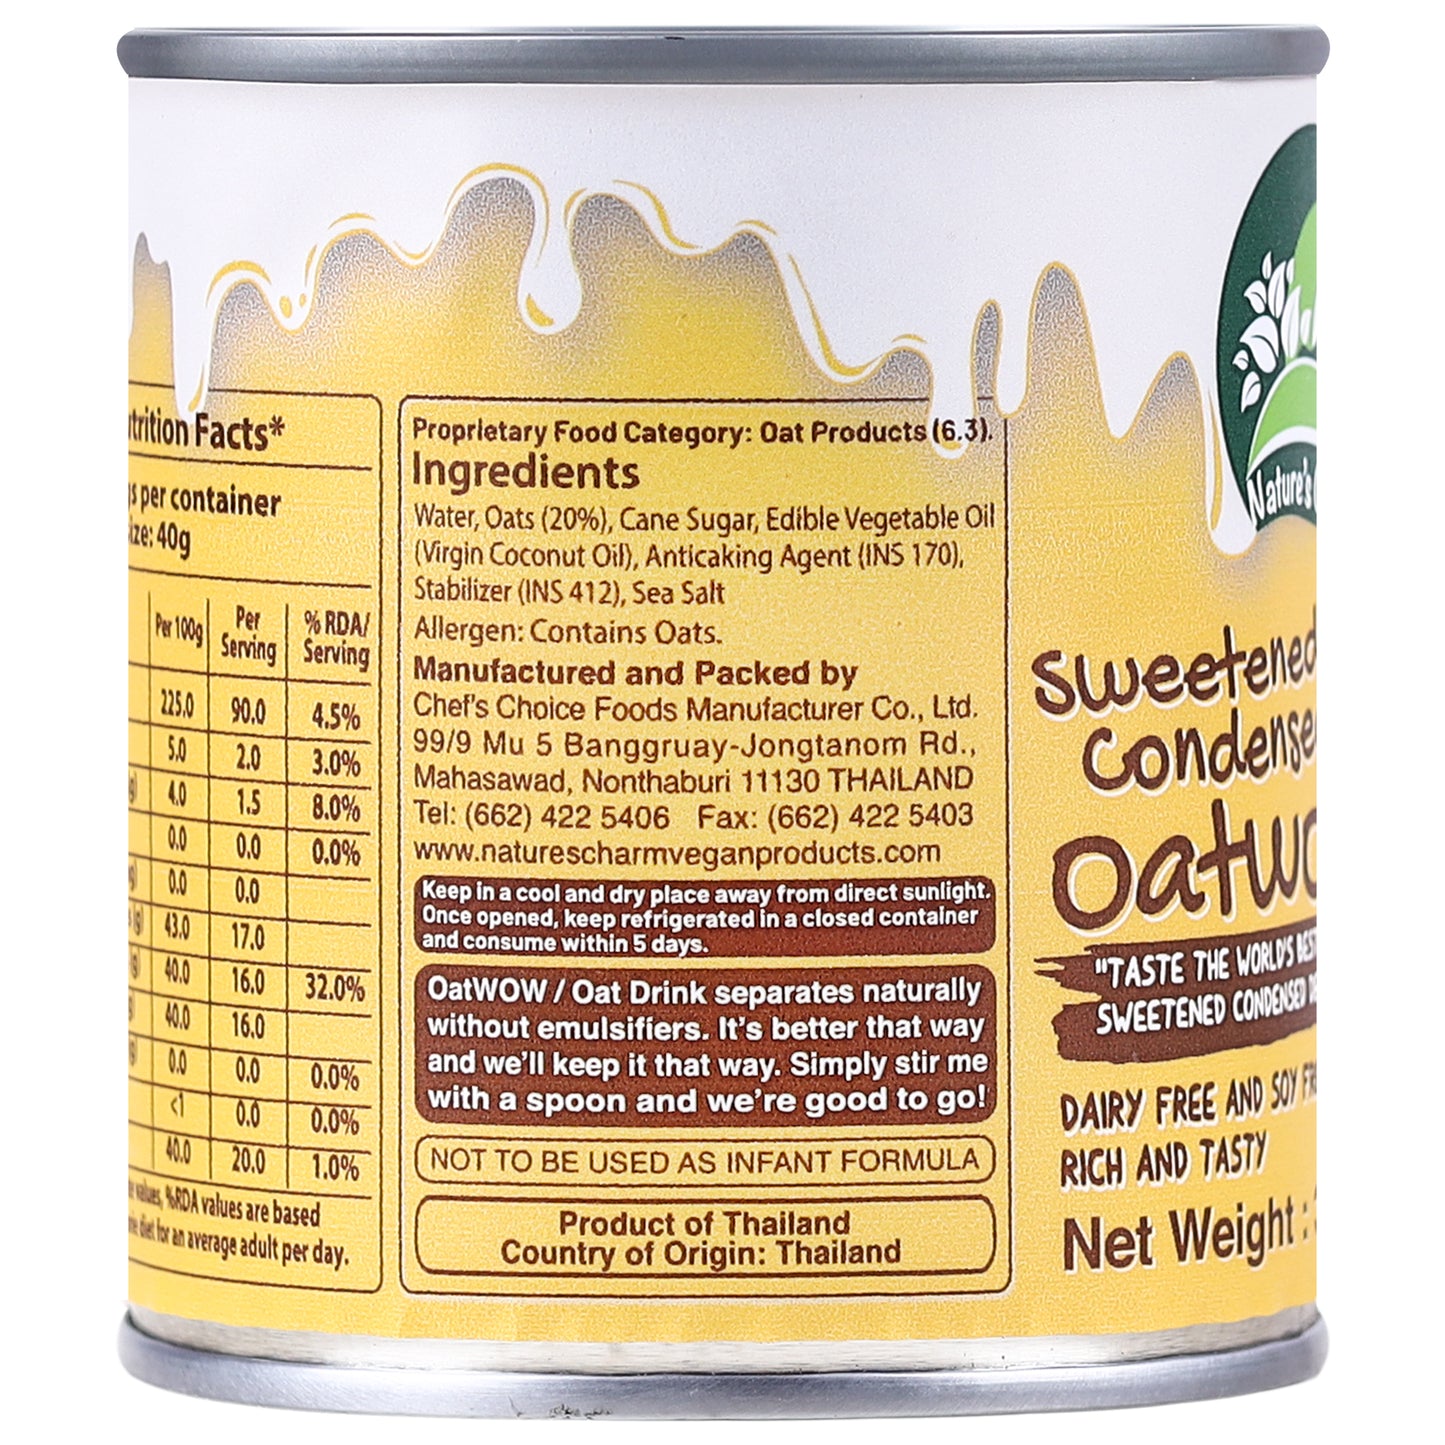 Urban Platter Sweetened Condensed Oatwow Dessert Mate, 320g (Product of Thailand, Oat-Based, Dairy &amp;  Soy Free, Perfect for Cakes, Fudge, Cookies)